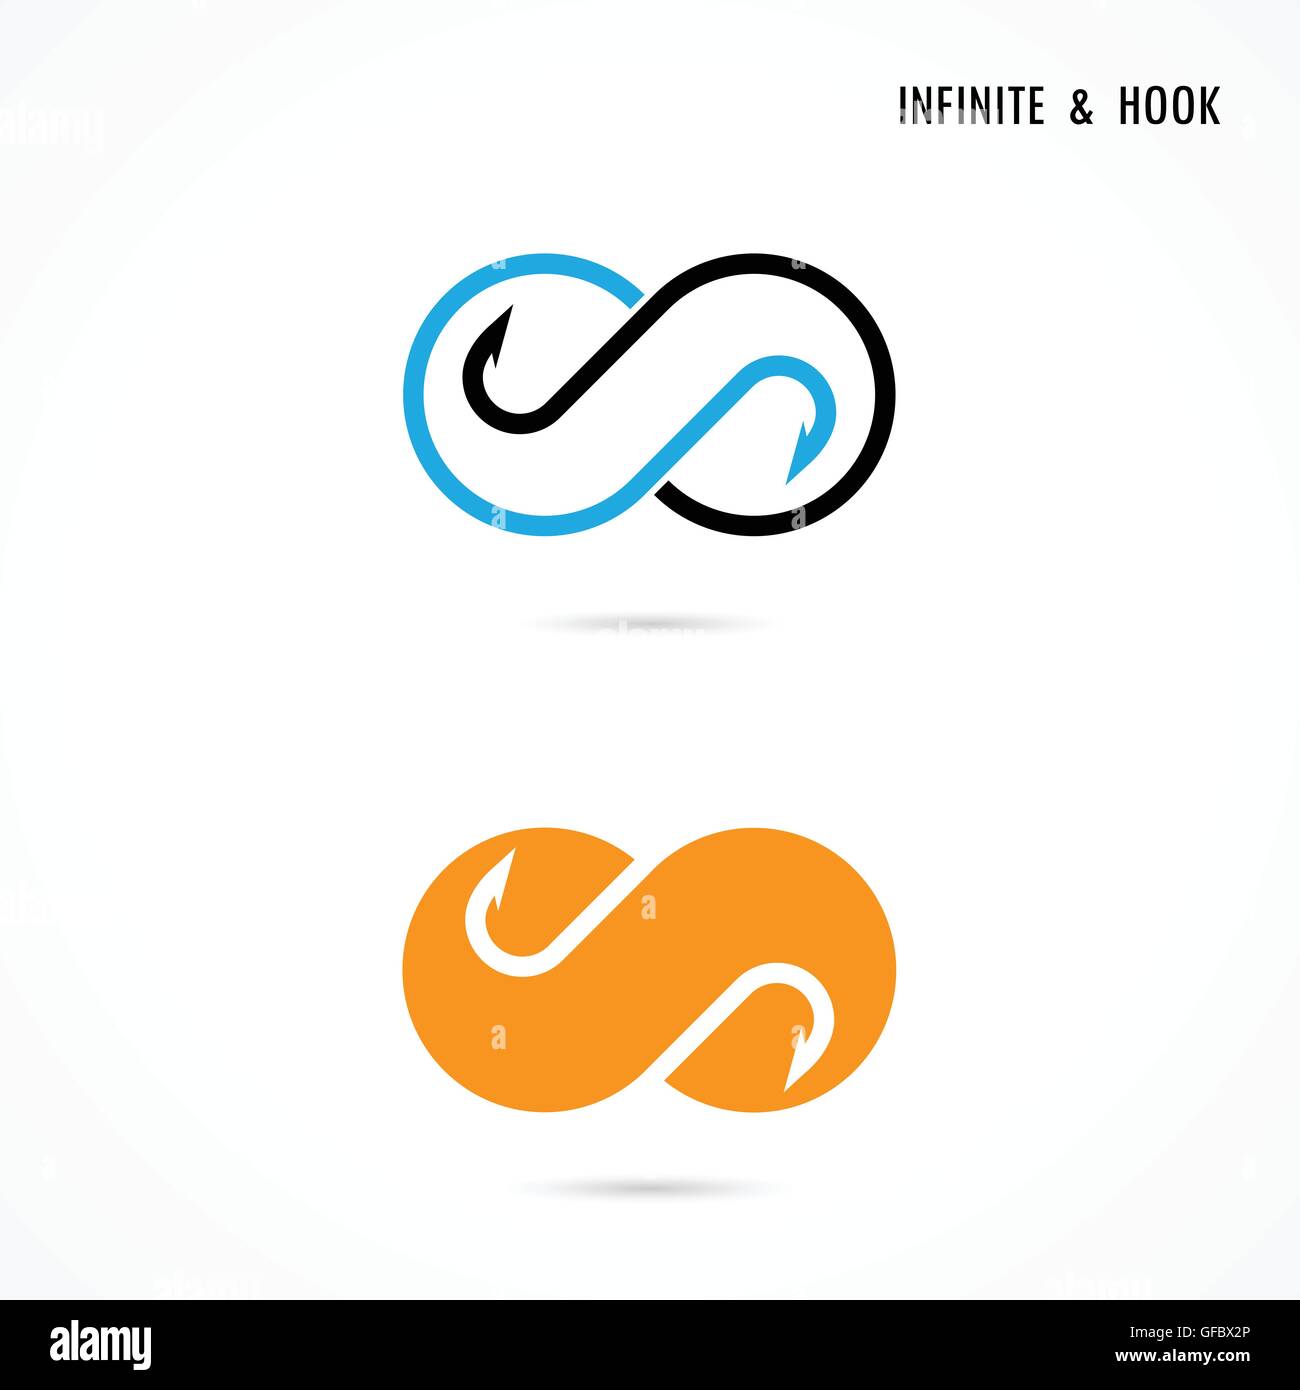 Fishhook and infinite logo elements design.Infinity icon.Abstract hook logo.Vector illustration. Stock Vector